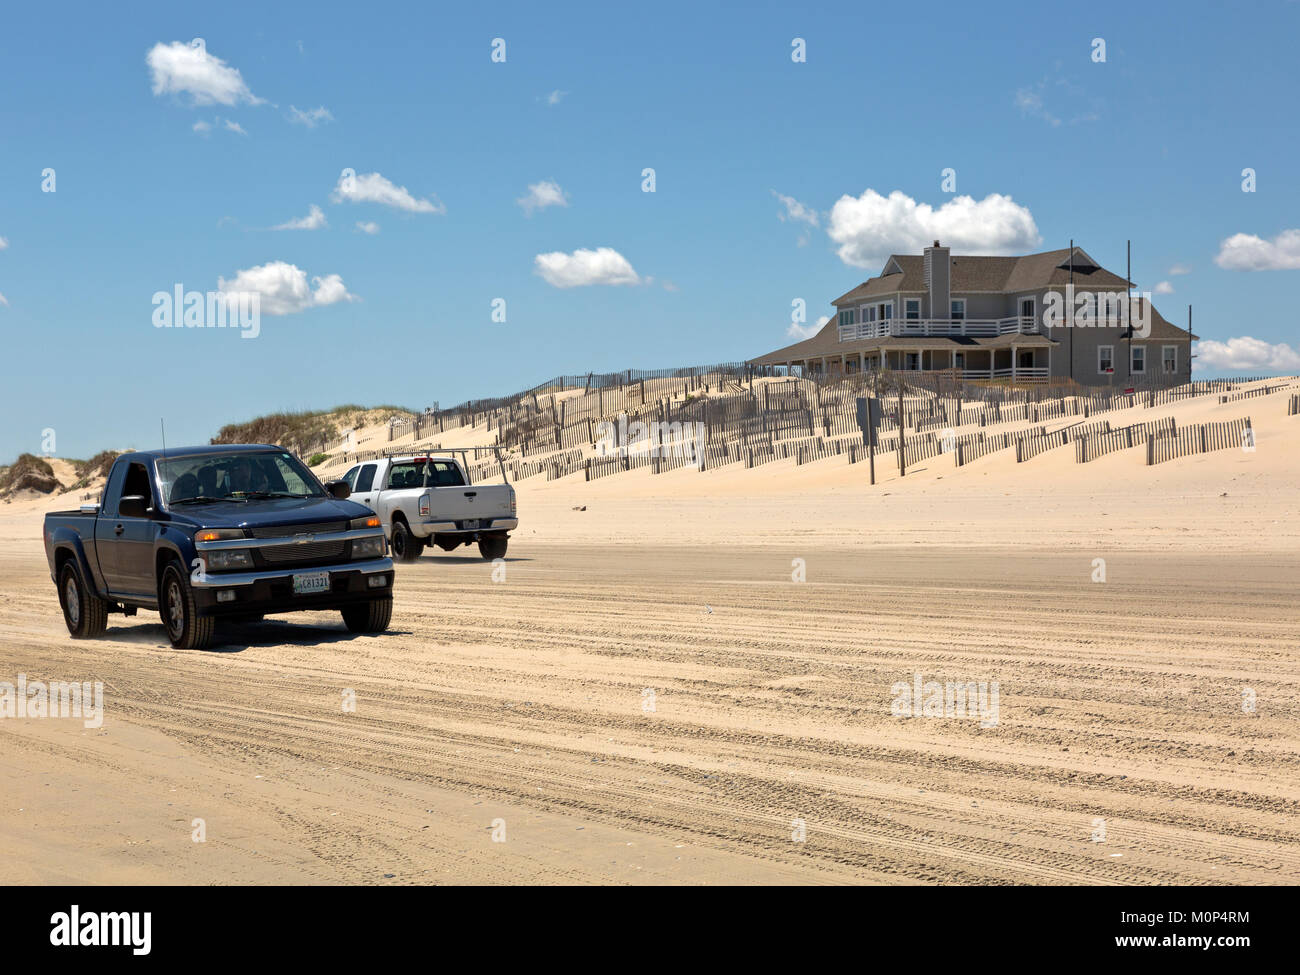 NC01410-00...NORTH CAROLINA - Sand fences attempt to stablize a sand dune along the Atlantic Coast at the edge of a housing developement located beyon Stock Photo